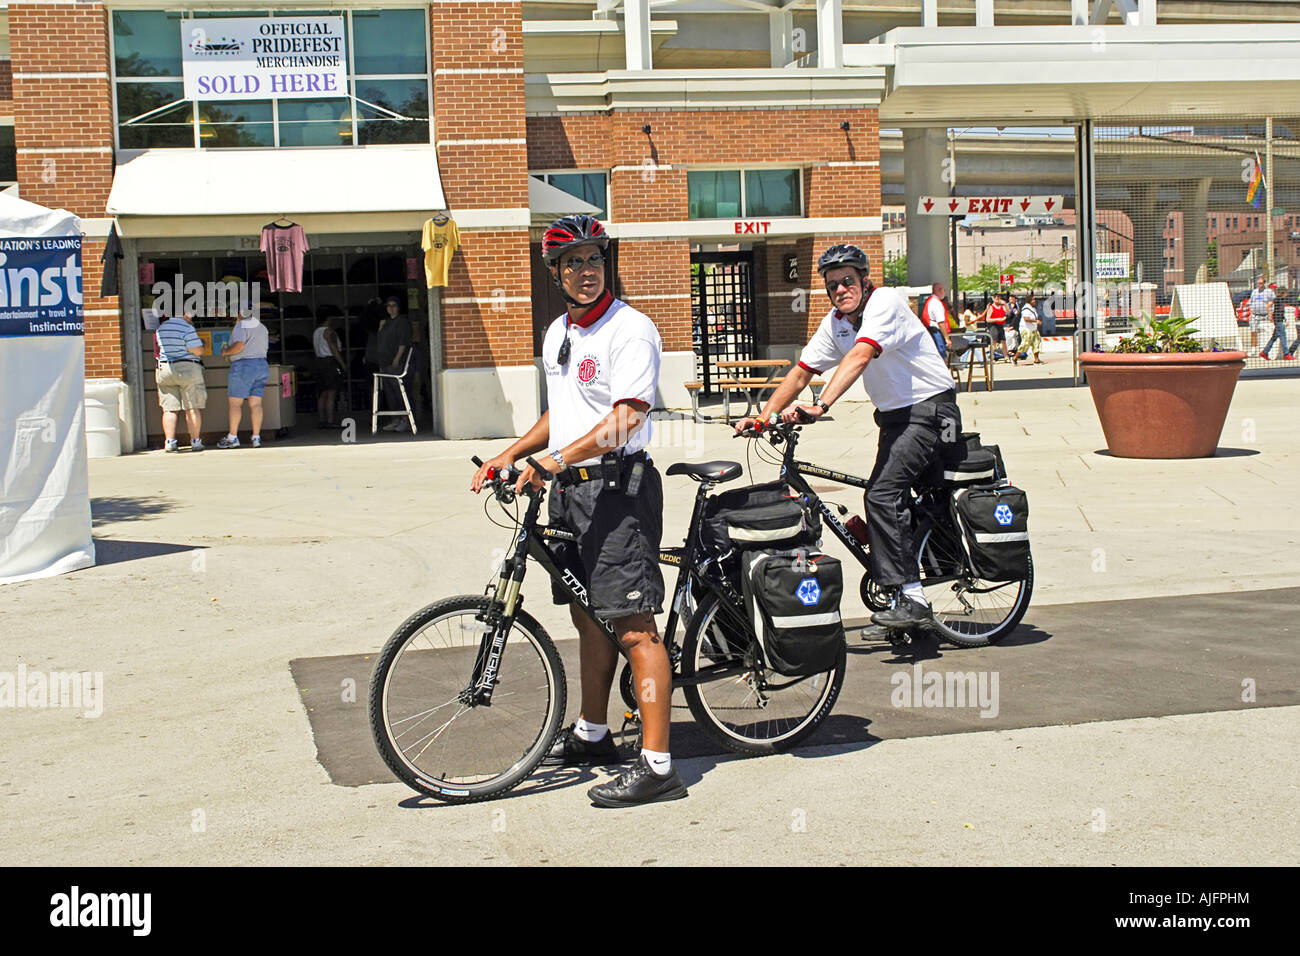 Milwaukee Fire Dept Paramedics on Bicycles at the Gay Pride Festival Stock Photo